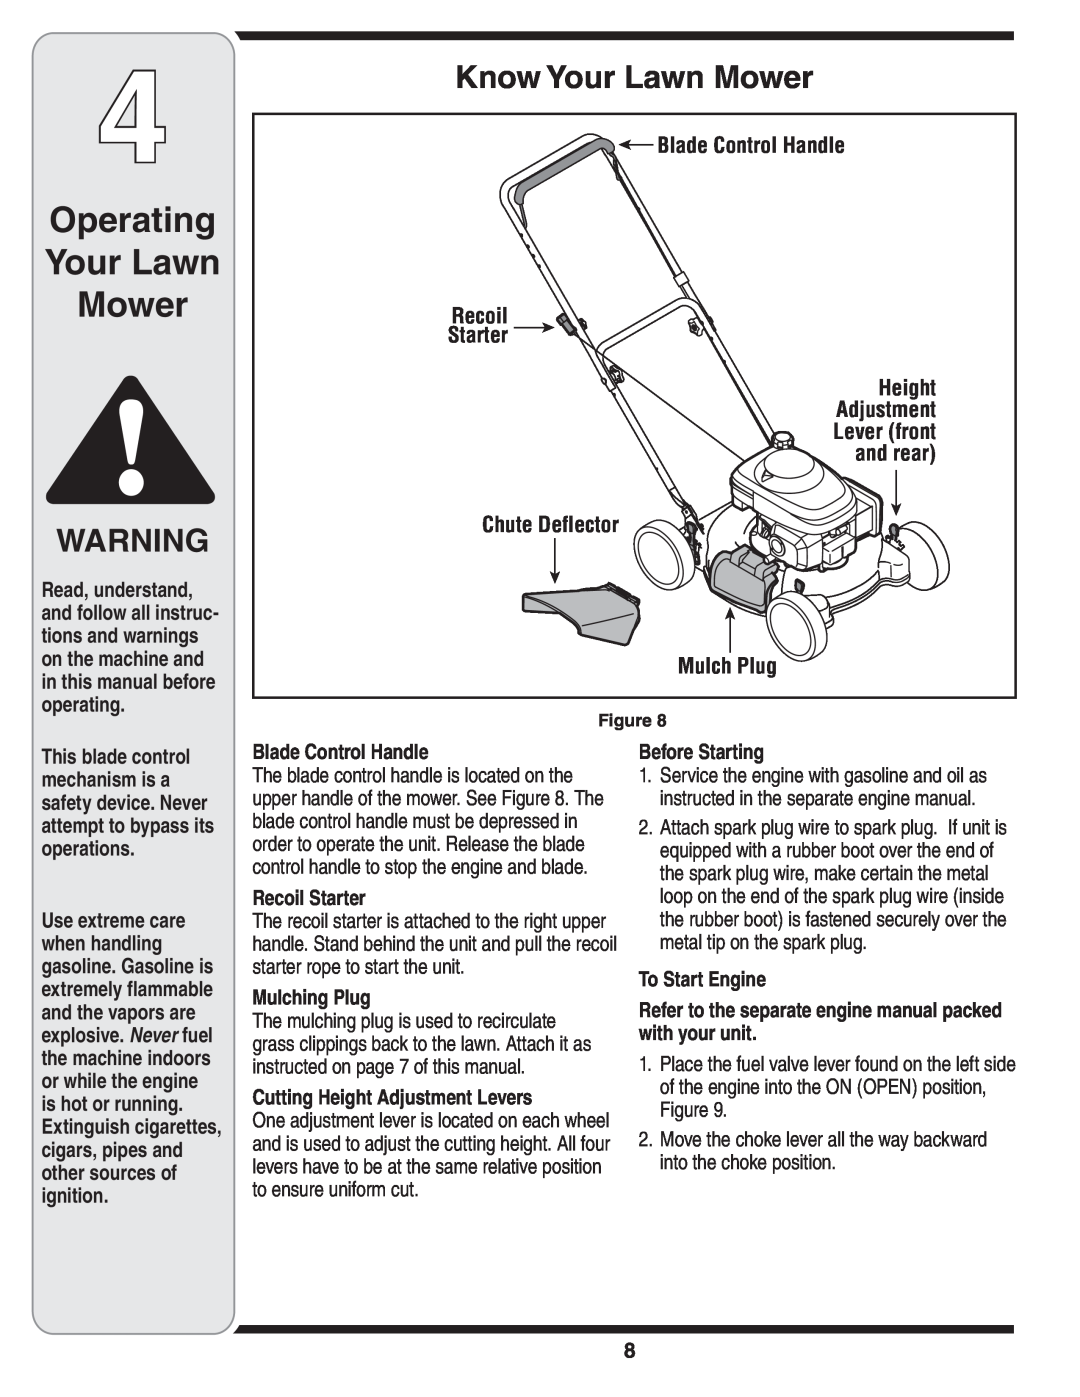 Bolens 100 warranty Operating Your Lawn Mower, Know Your Lawn Mower 